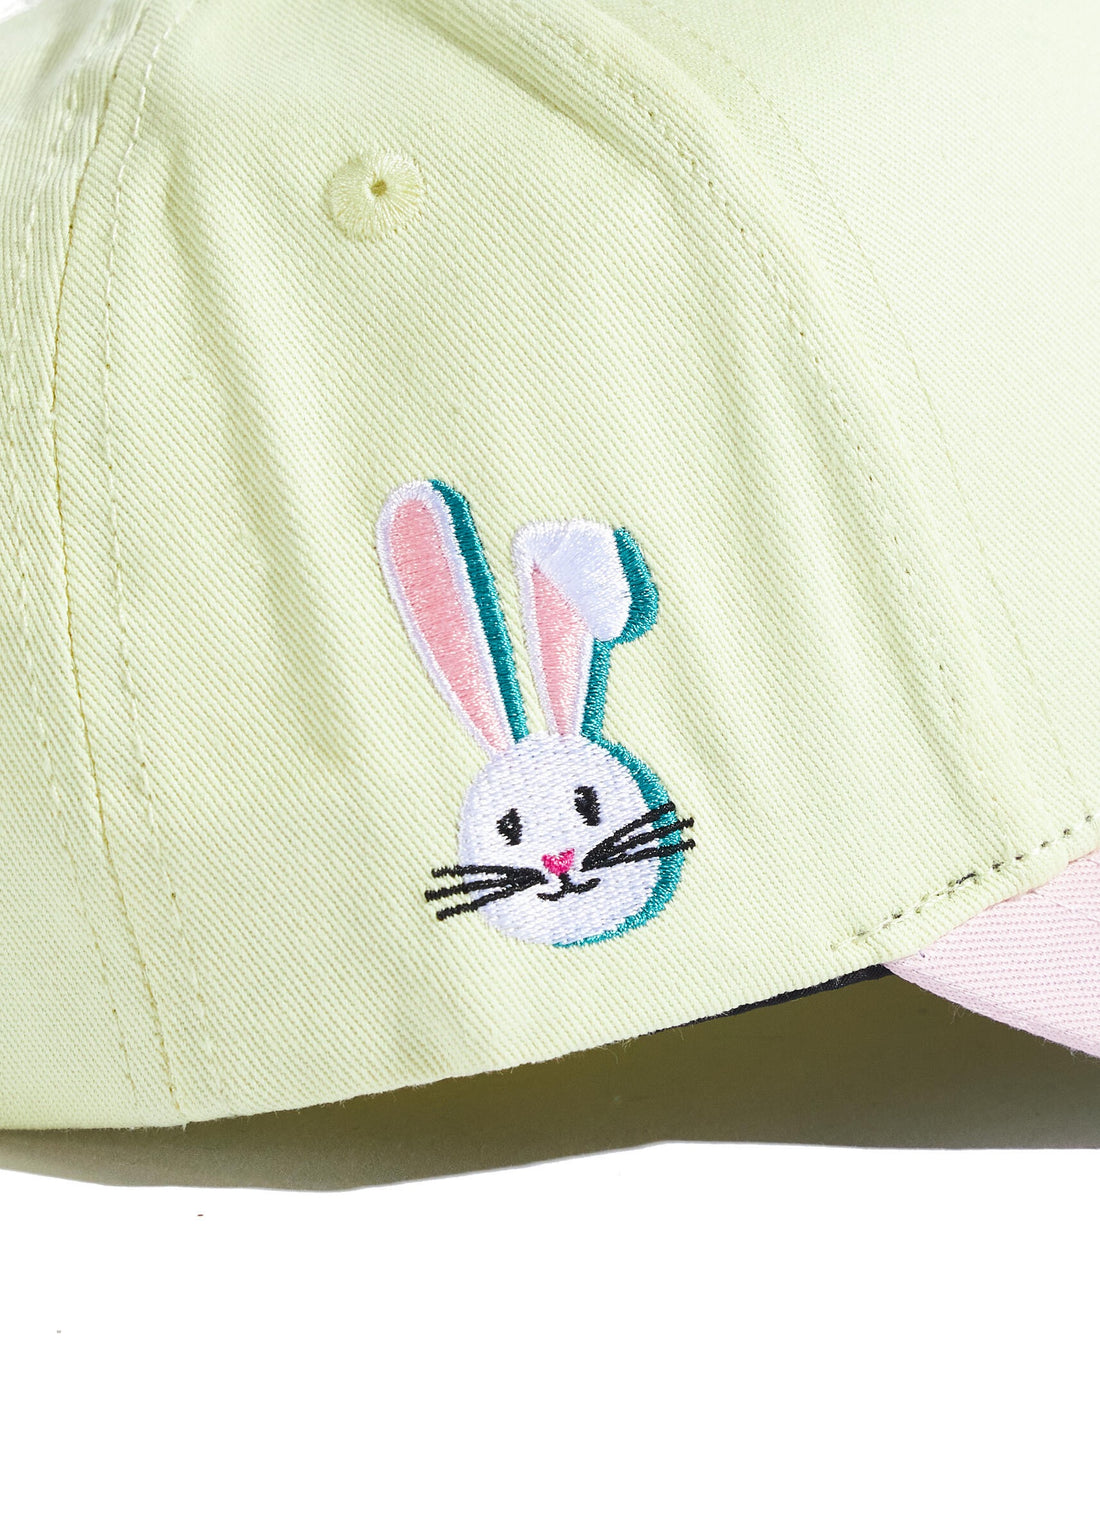 Reference LA Paradise Easter Snapback - Yellow/Pink